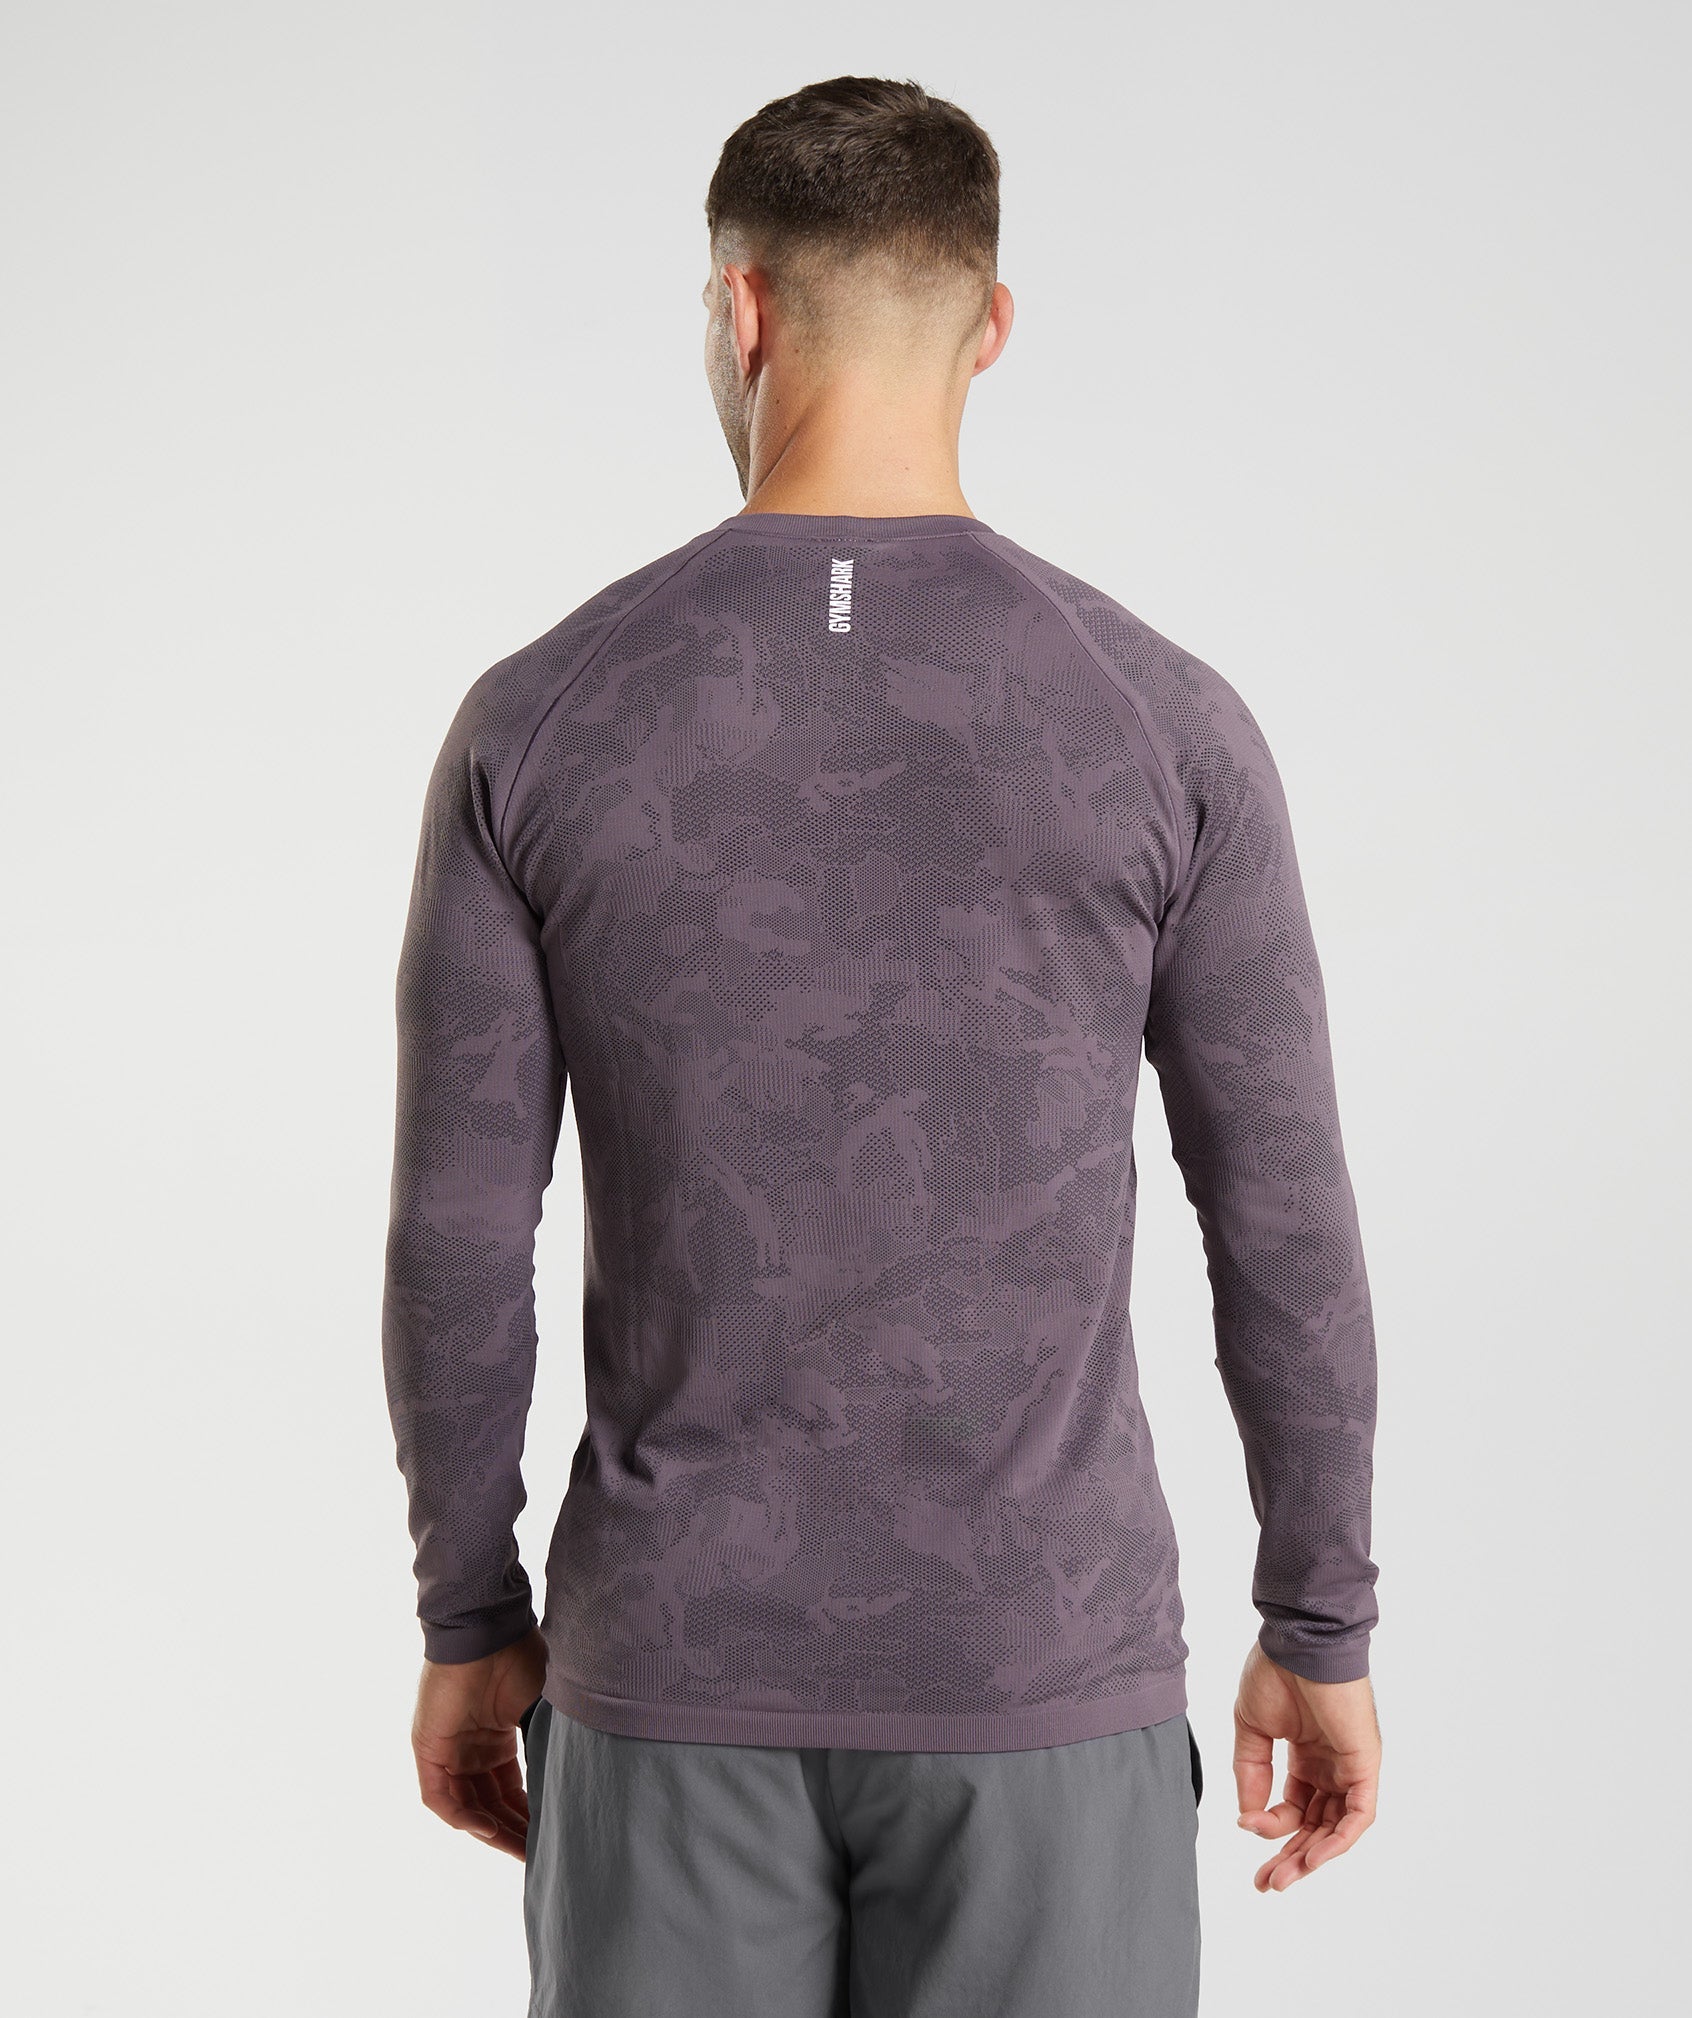 Geo Seamless Long Sleeve T-Shirt in Musk Lilac/Black - view 2